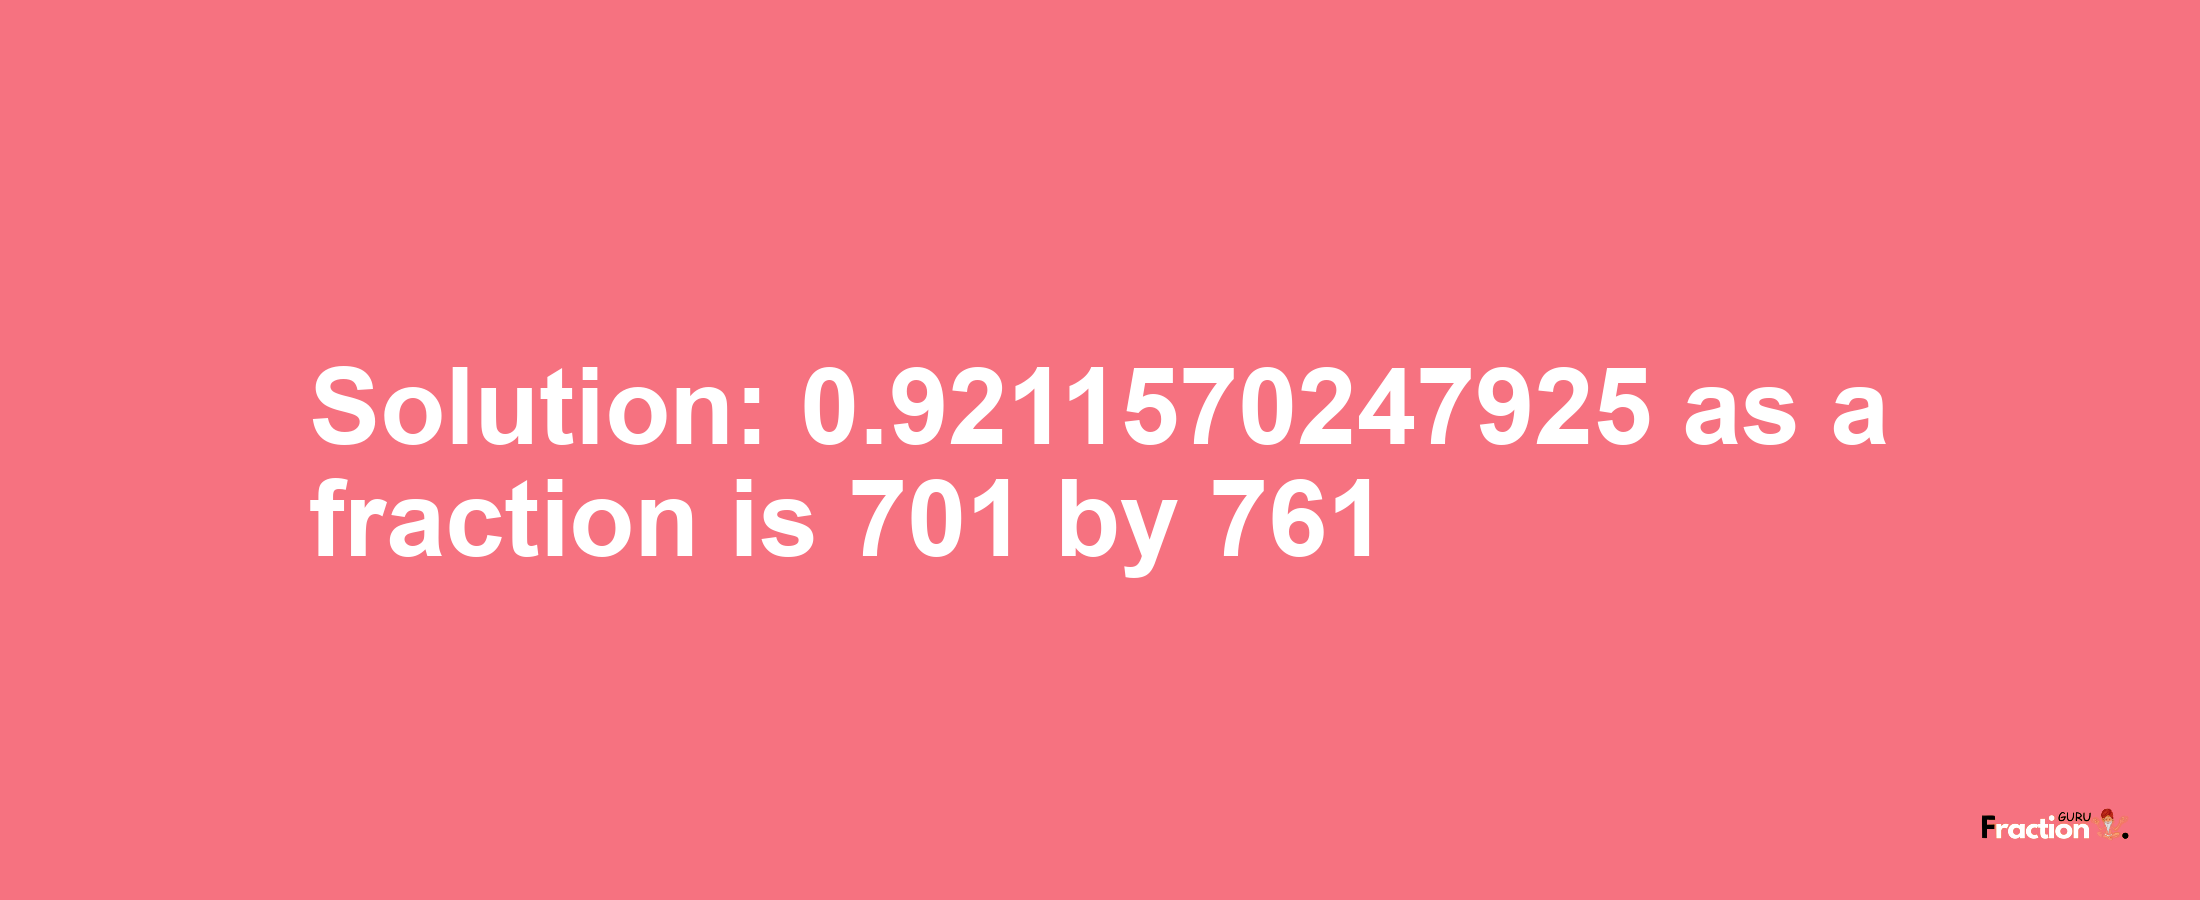 Solution:0.9211570247925 as a fraction is 701/761